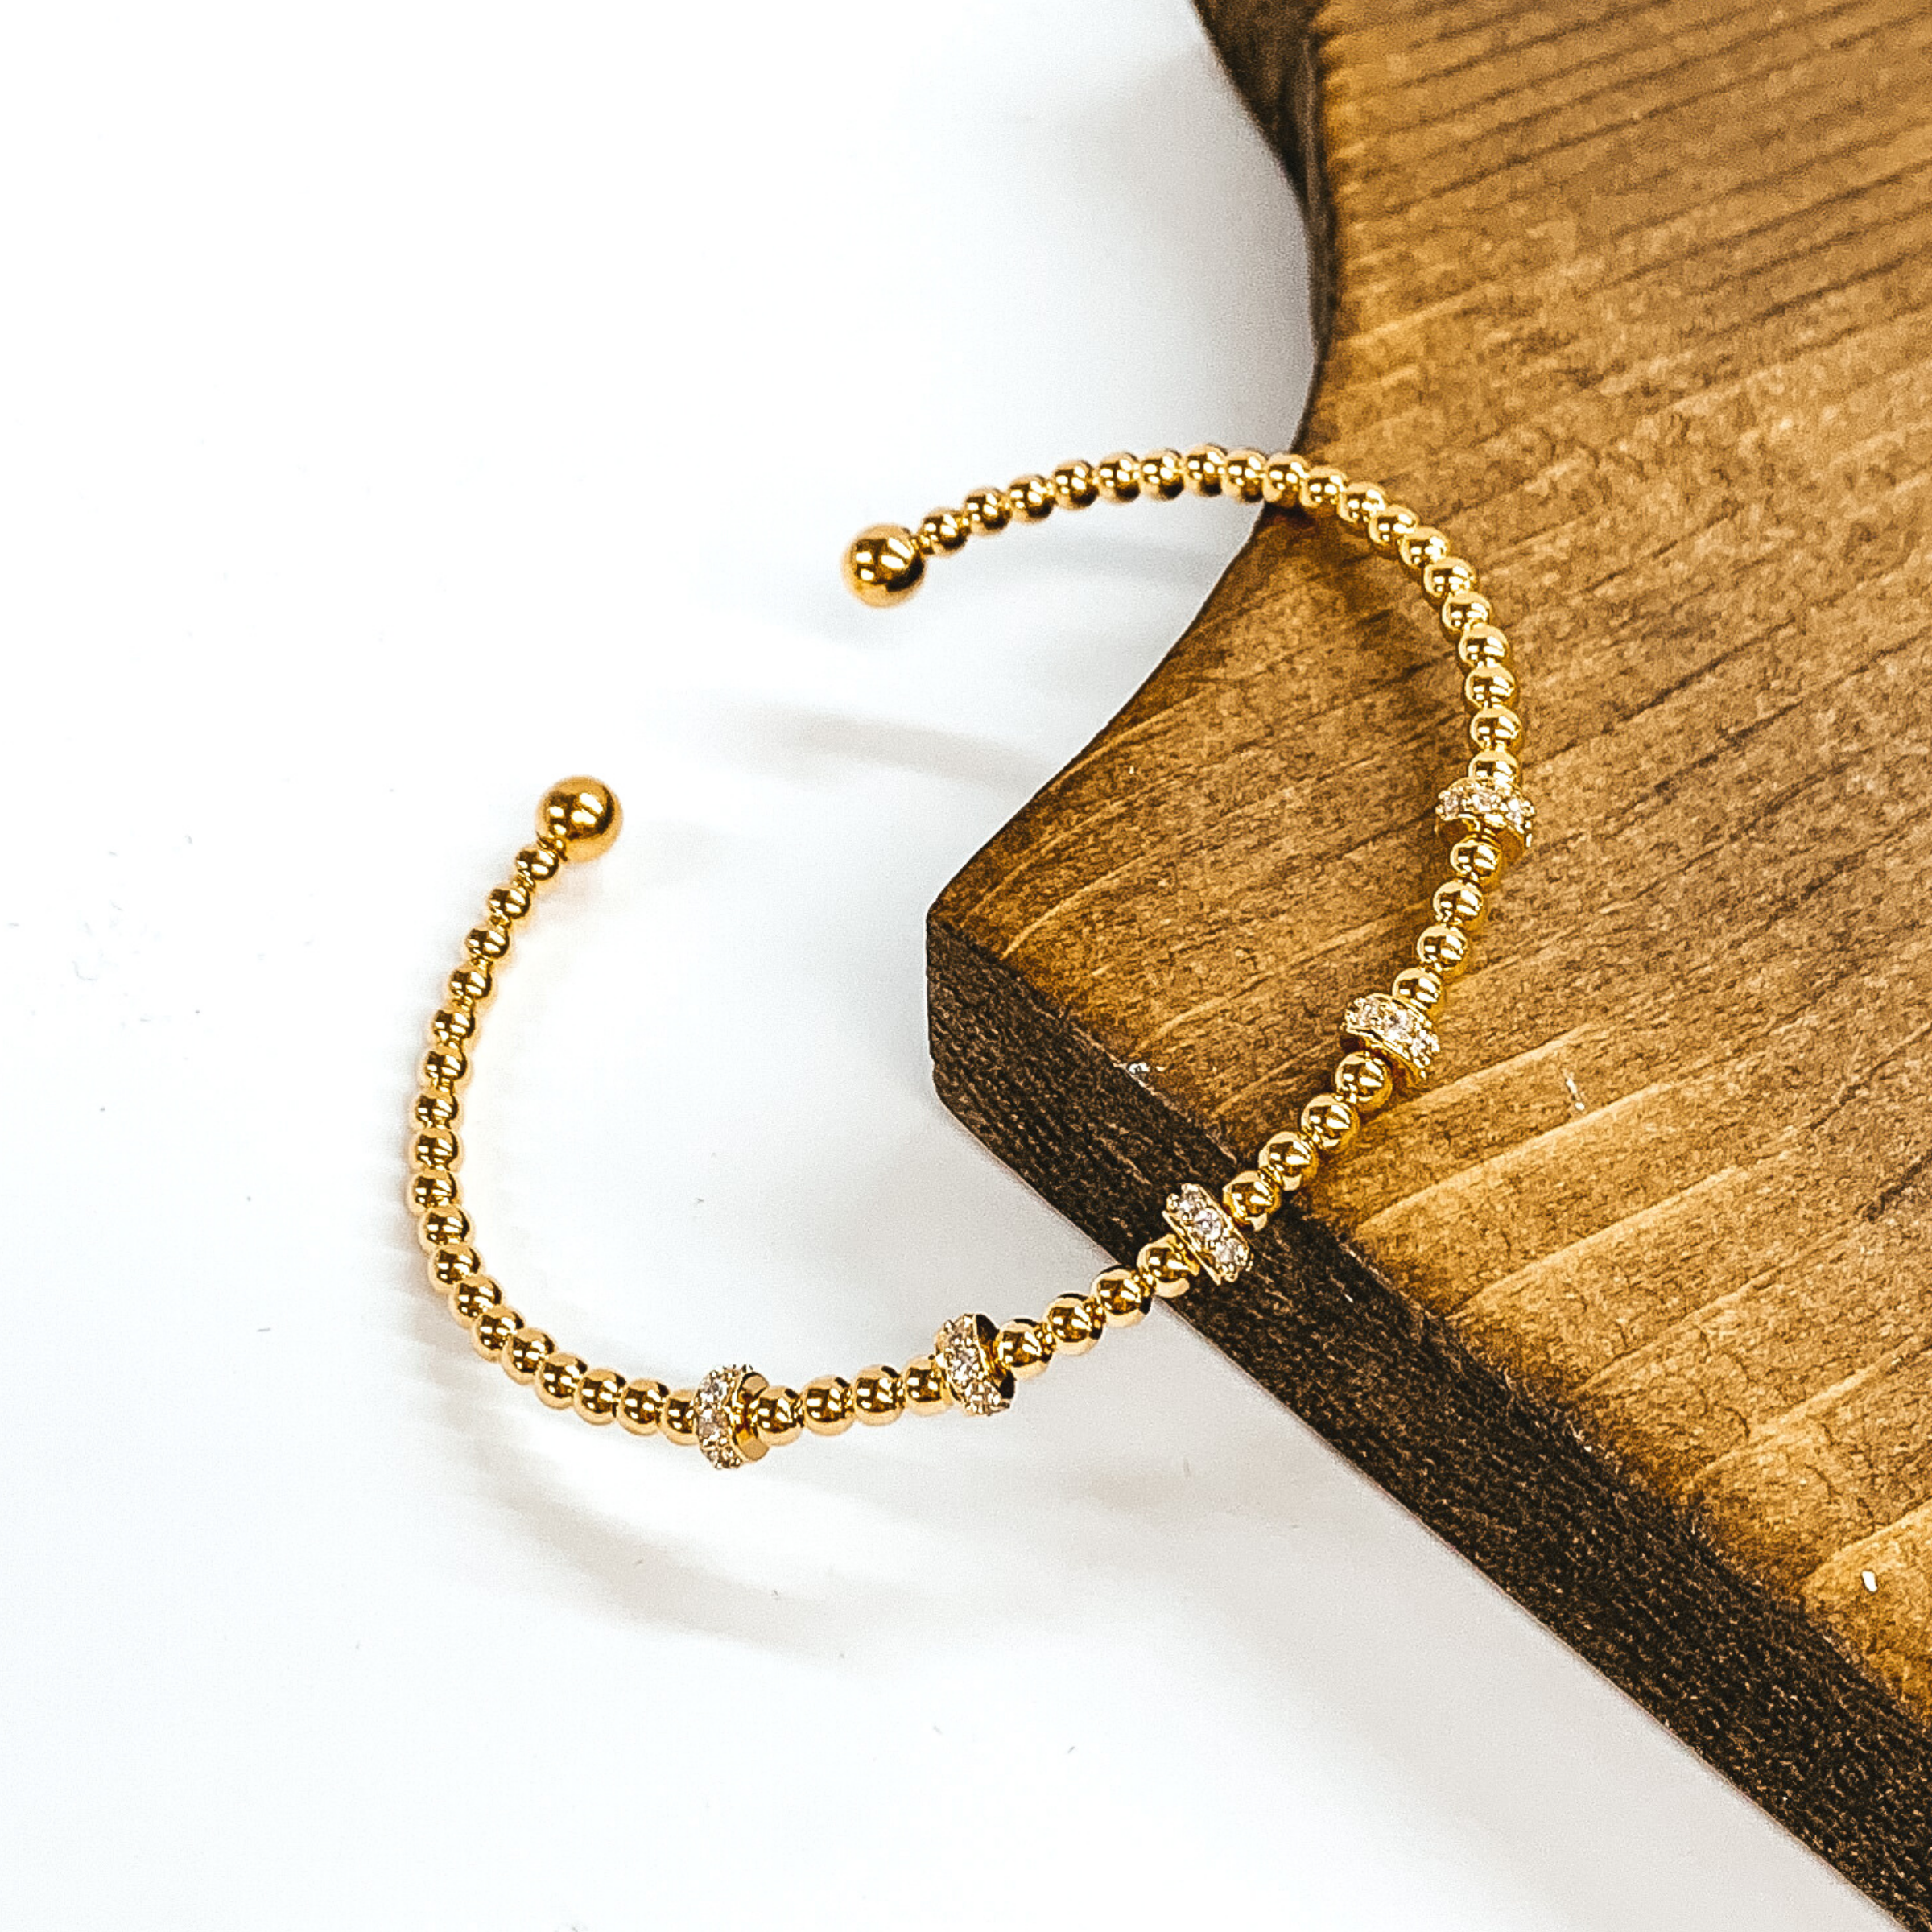 Gold beaded bangle bracelet with clear crystals spacers. This bangle is pictured leaning on a brown block on a white background.